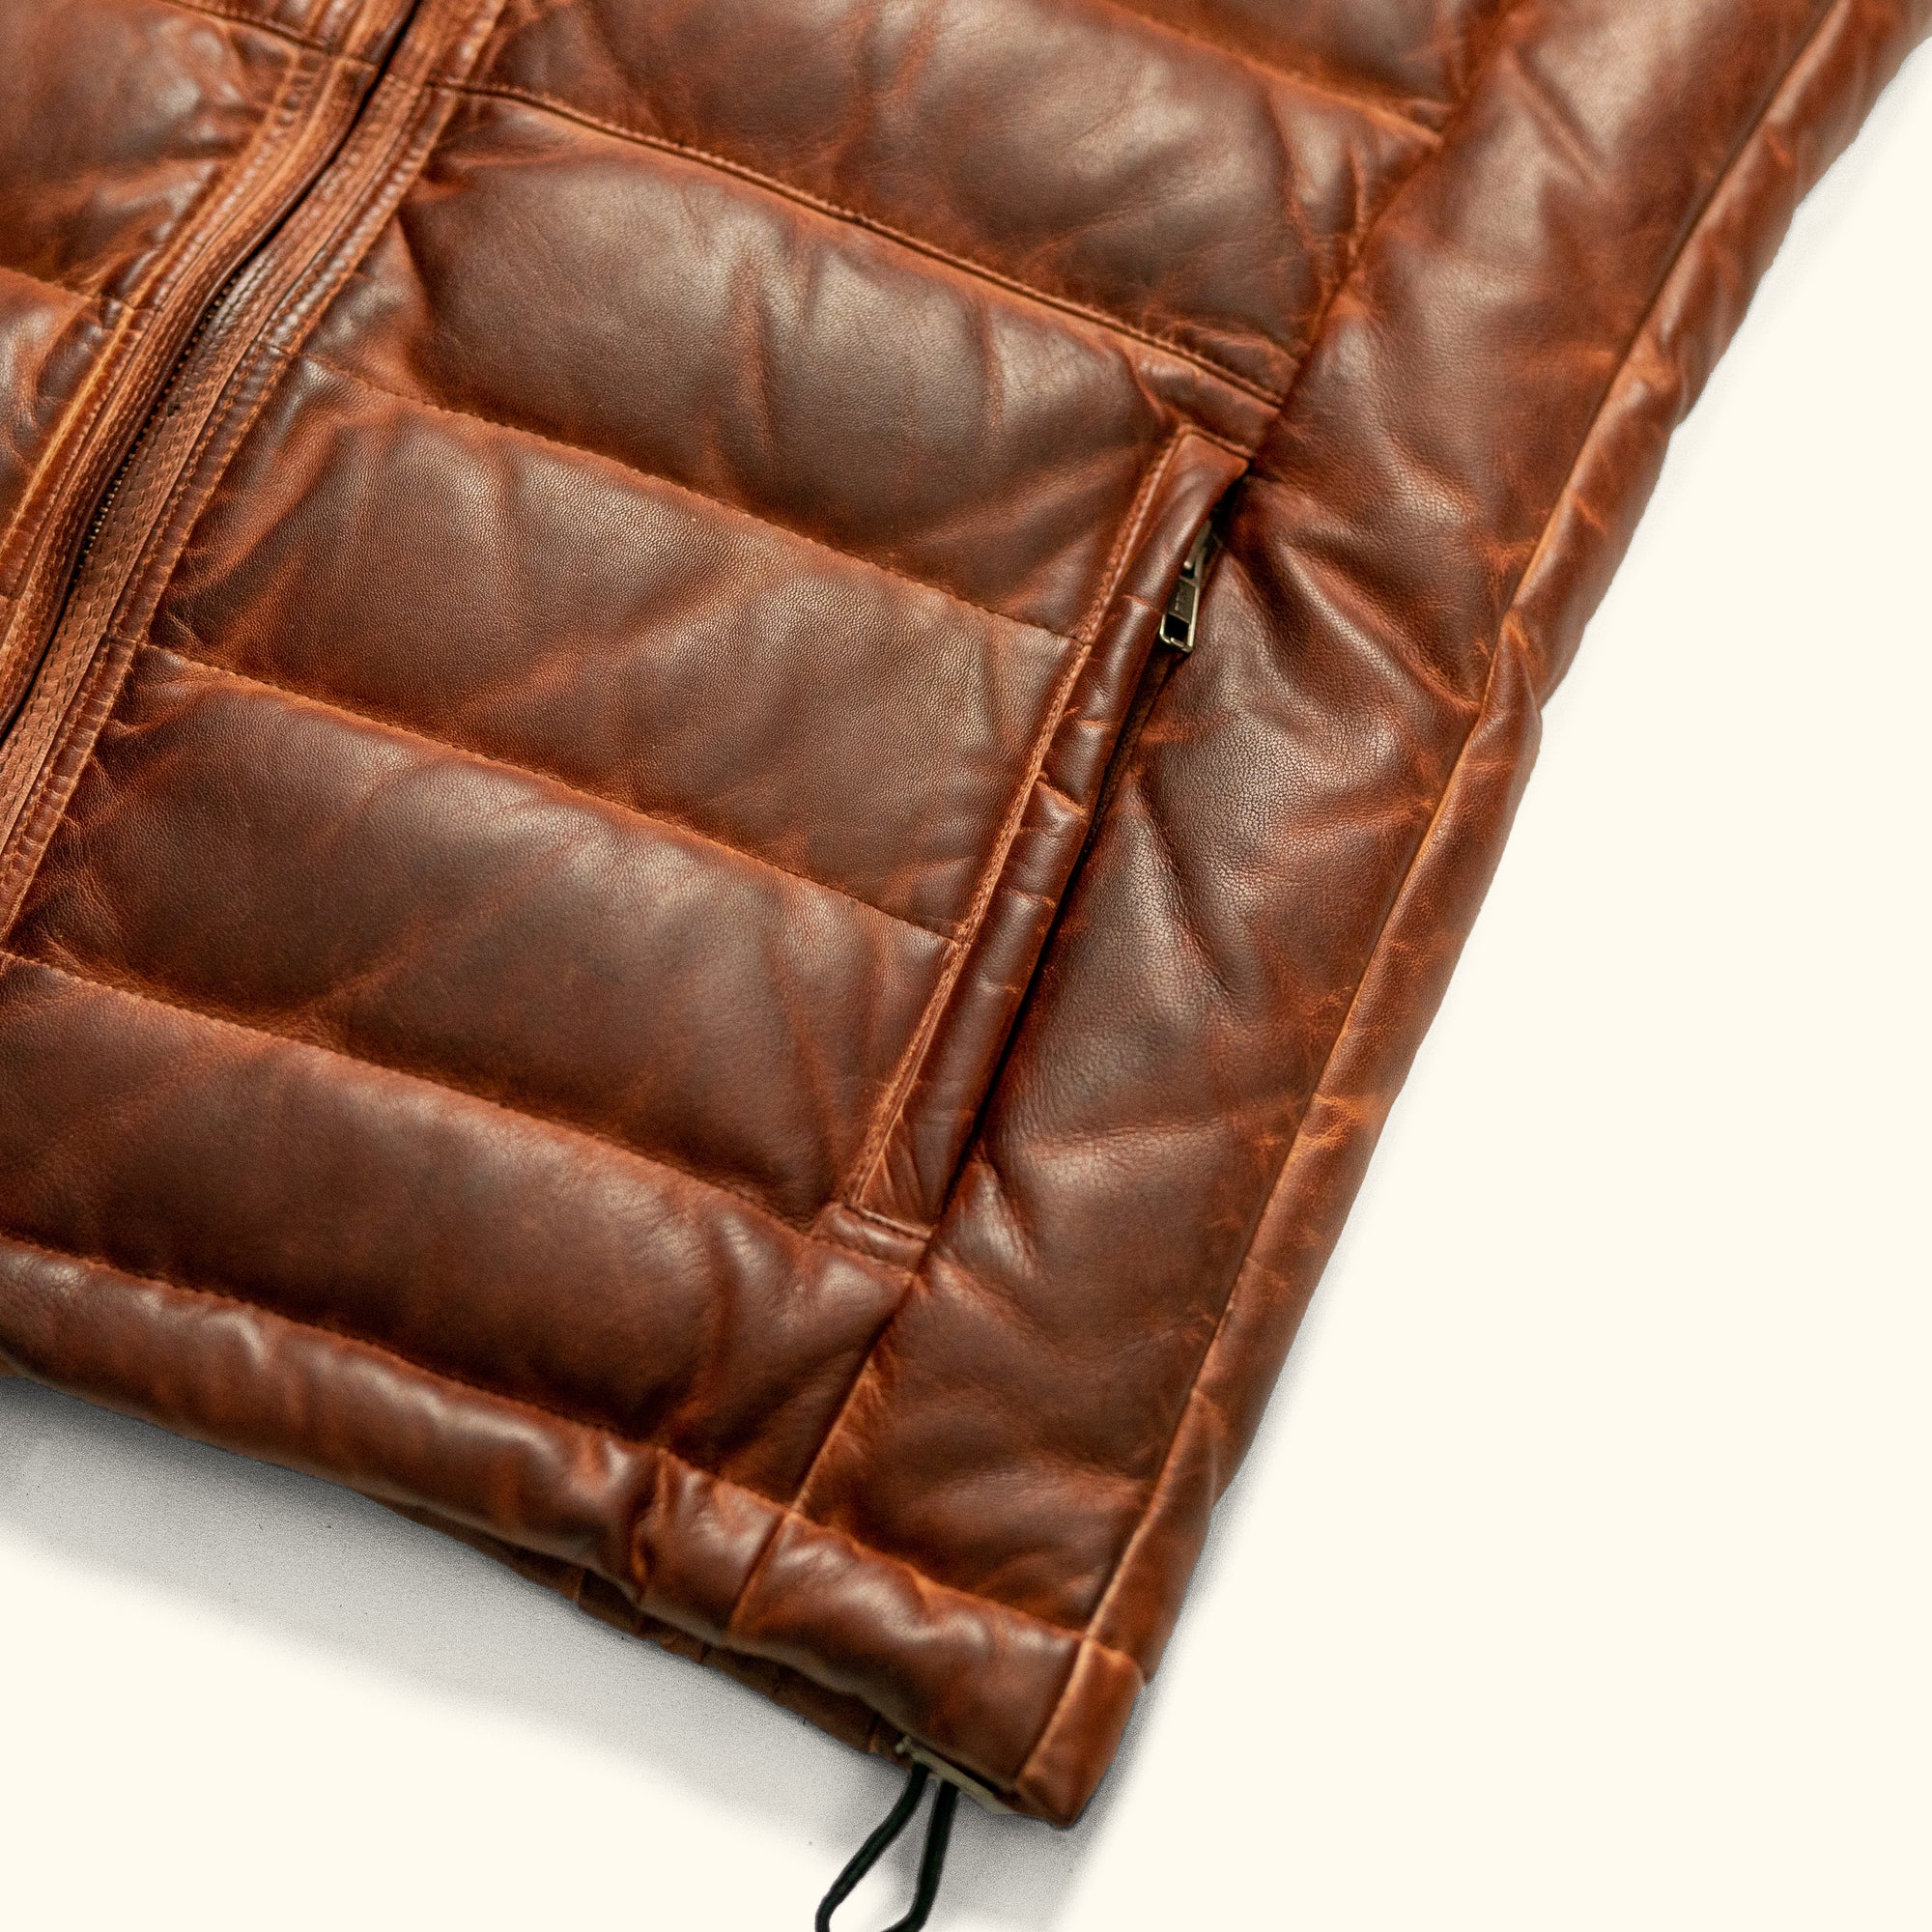 Brown Puffer Vest: 100% Leather & Down Feather